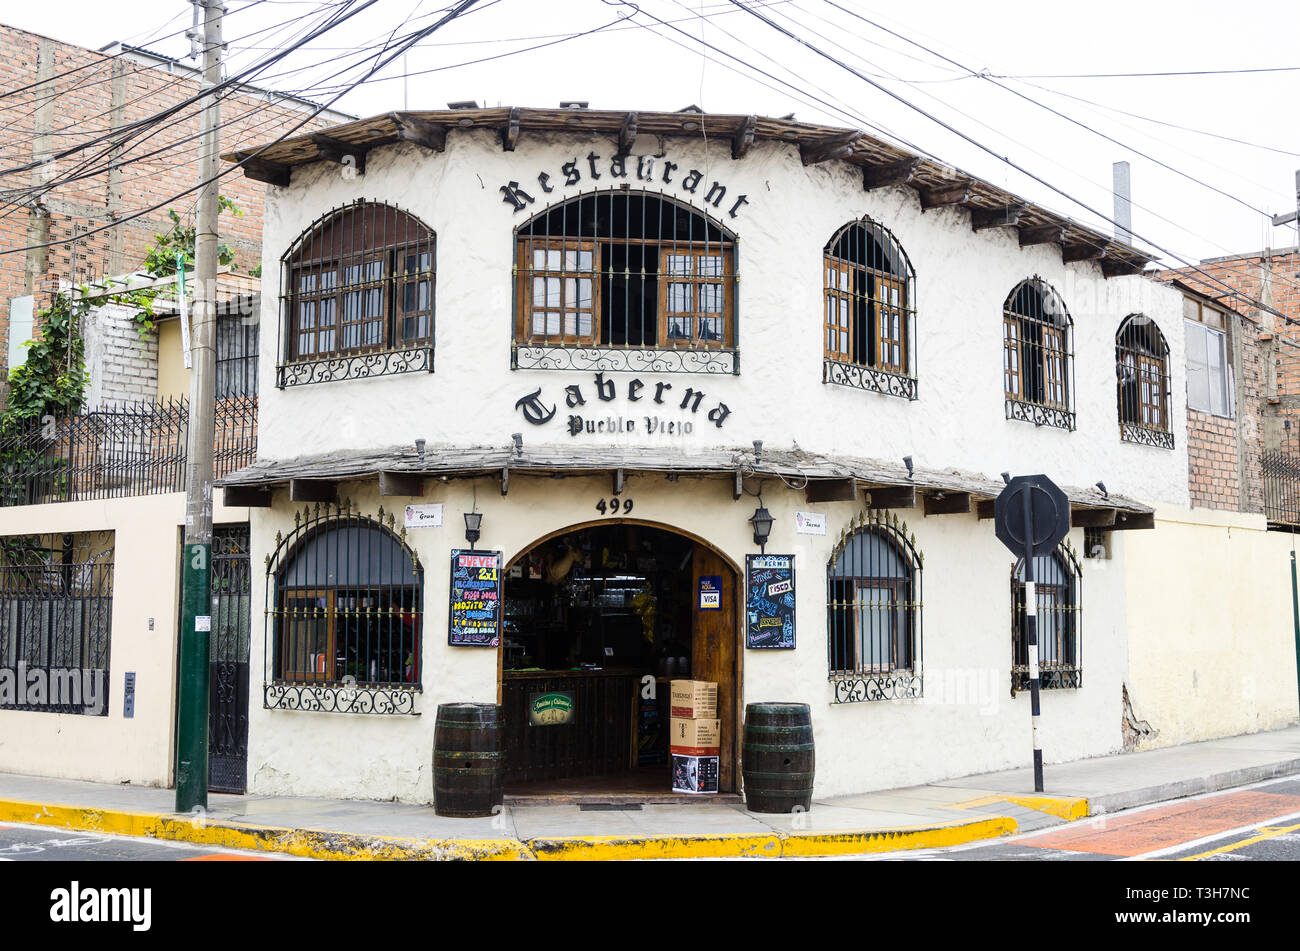 Lima, Peru January 17th, 2019 : Pueblo Viejo of Surco tavern located 3 minutes walk from the main square of Surco Pueblo in Lima - Peru Stock Photo